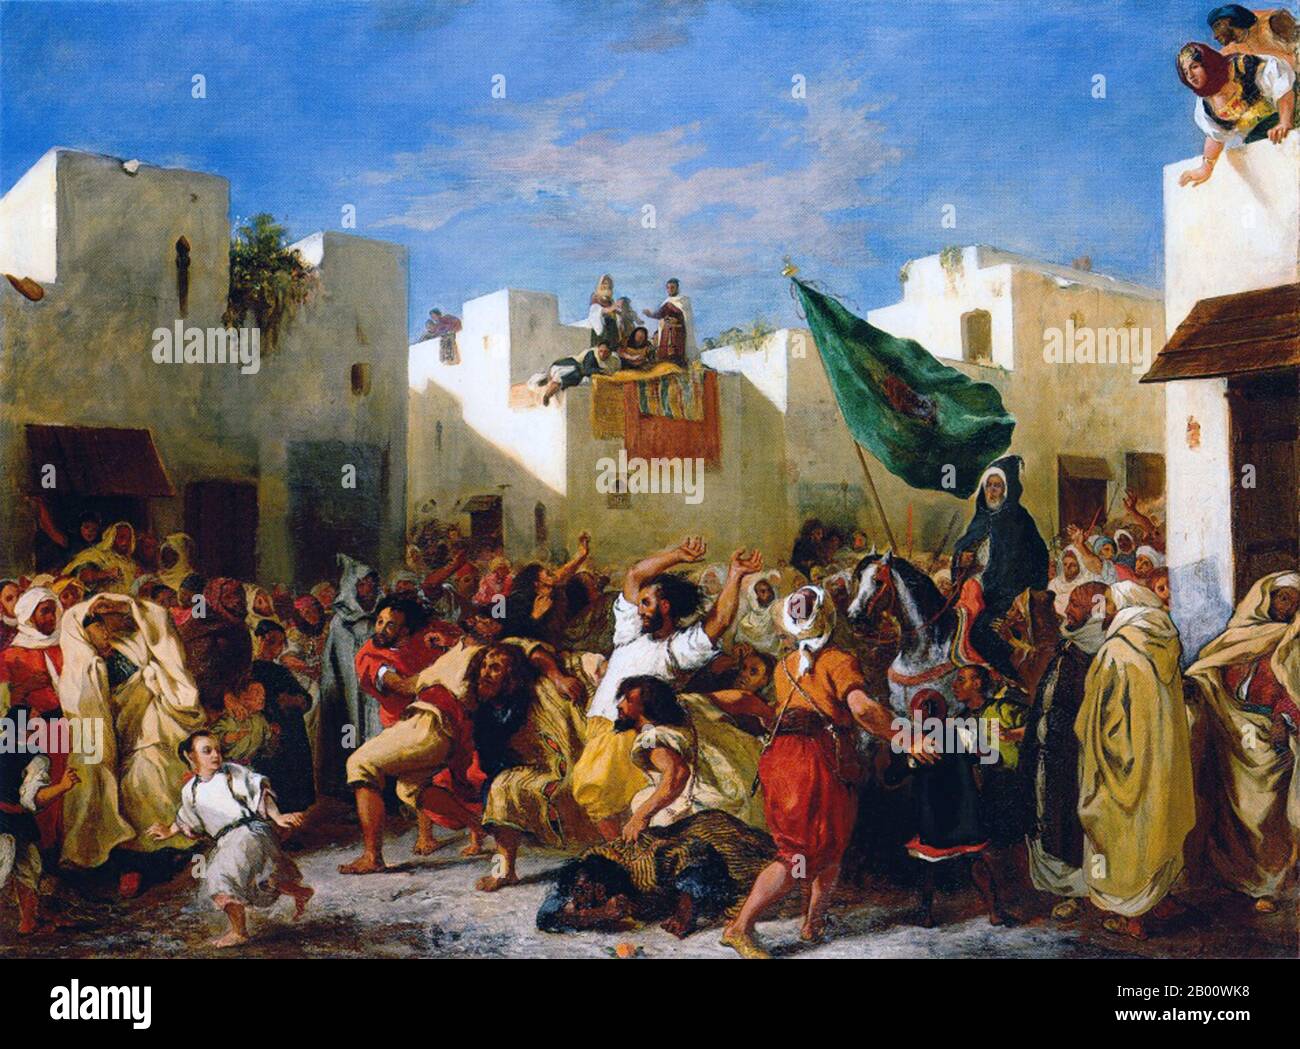 Morocco: 'The Fanatics of Tangier'. Oil on canvas painting by Eugene Delacroix (1798-1863), 1838.  Ferdinand Victor Eugène Delacroix (26 April 1798 - 13 August 1863) was the acknowledged master of the French Romantic school. In 1832, he traveled to North Africa with the French ambassador, Count de Mornay, who was to negotiate a treaty of friendship with the sultan of Morocco. One day in Tangier, the two hid in an attic and through the cracks of a shuttered window witnessed the frenzy of the Aïssaouas,'a fanatical Muslim sect'. The Aissawa is a religious and mystical brotherhood. Stock Photo